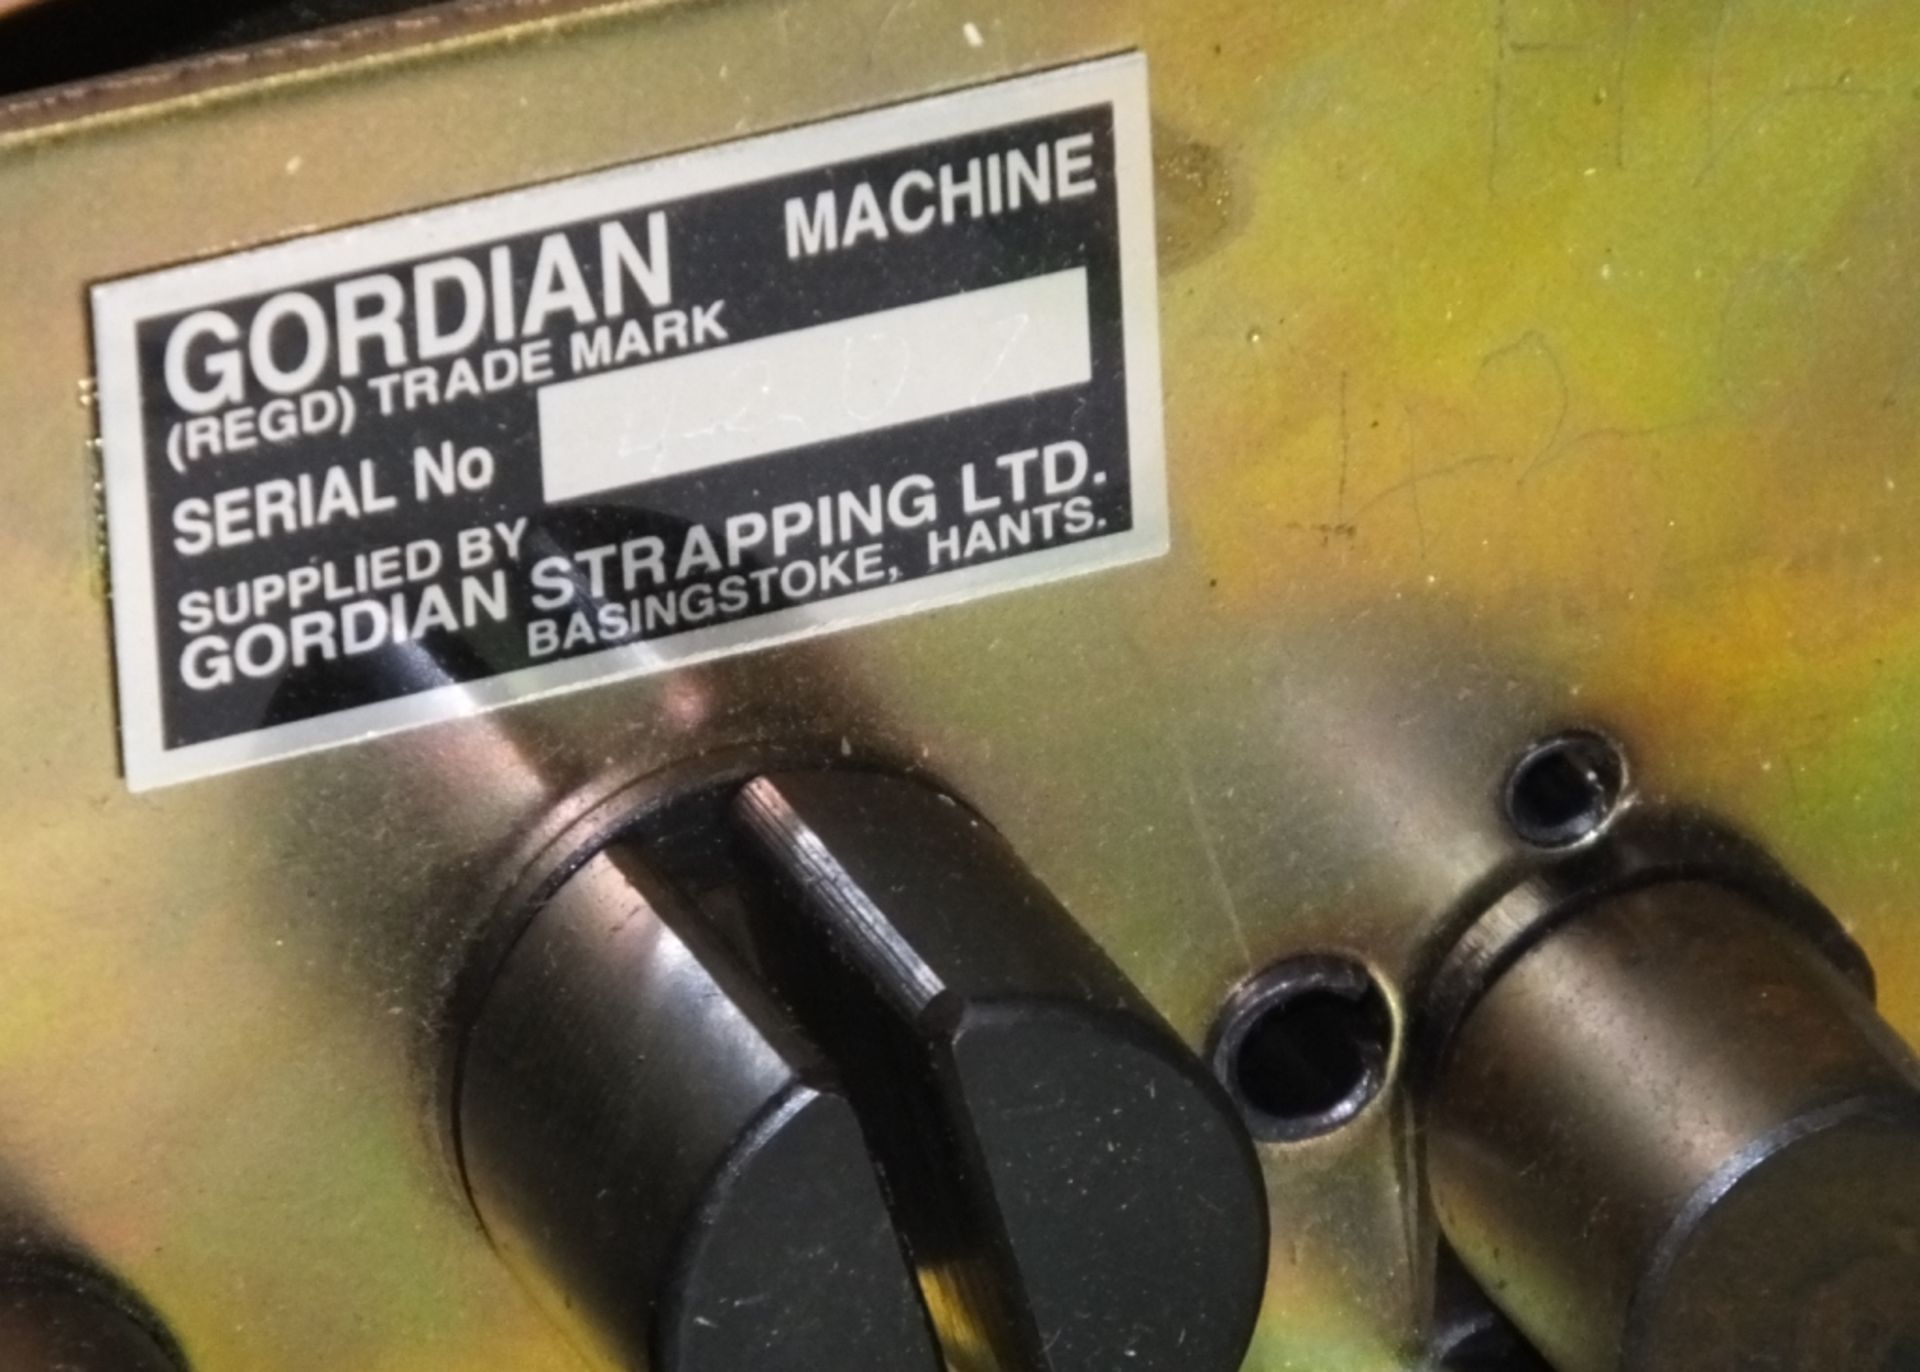 Gordian pallet strapping machine - Image 3 of 4